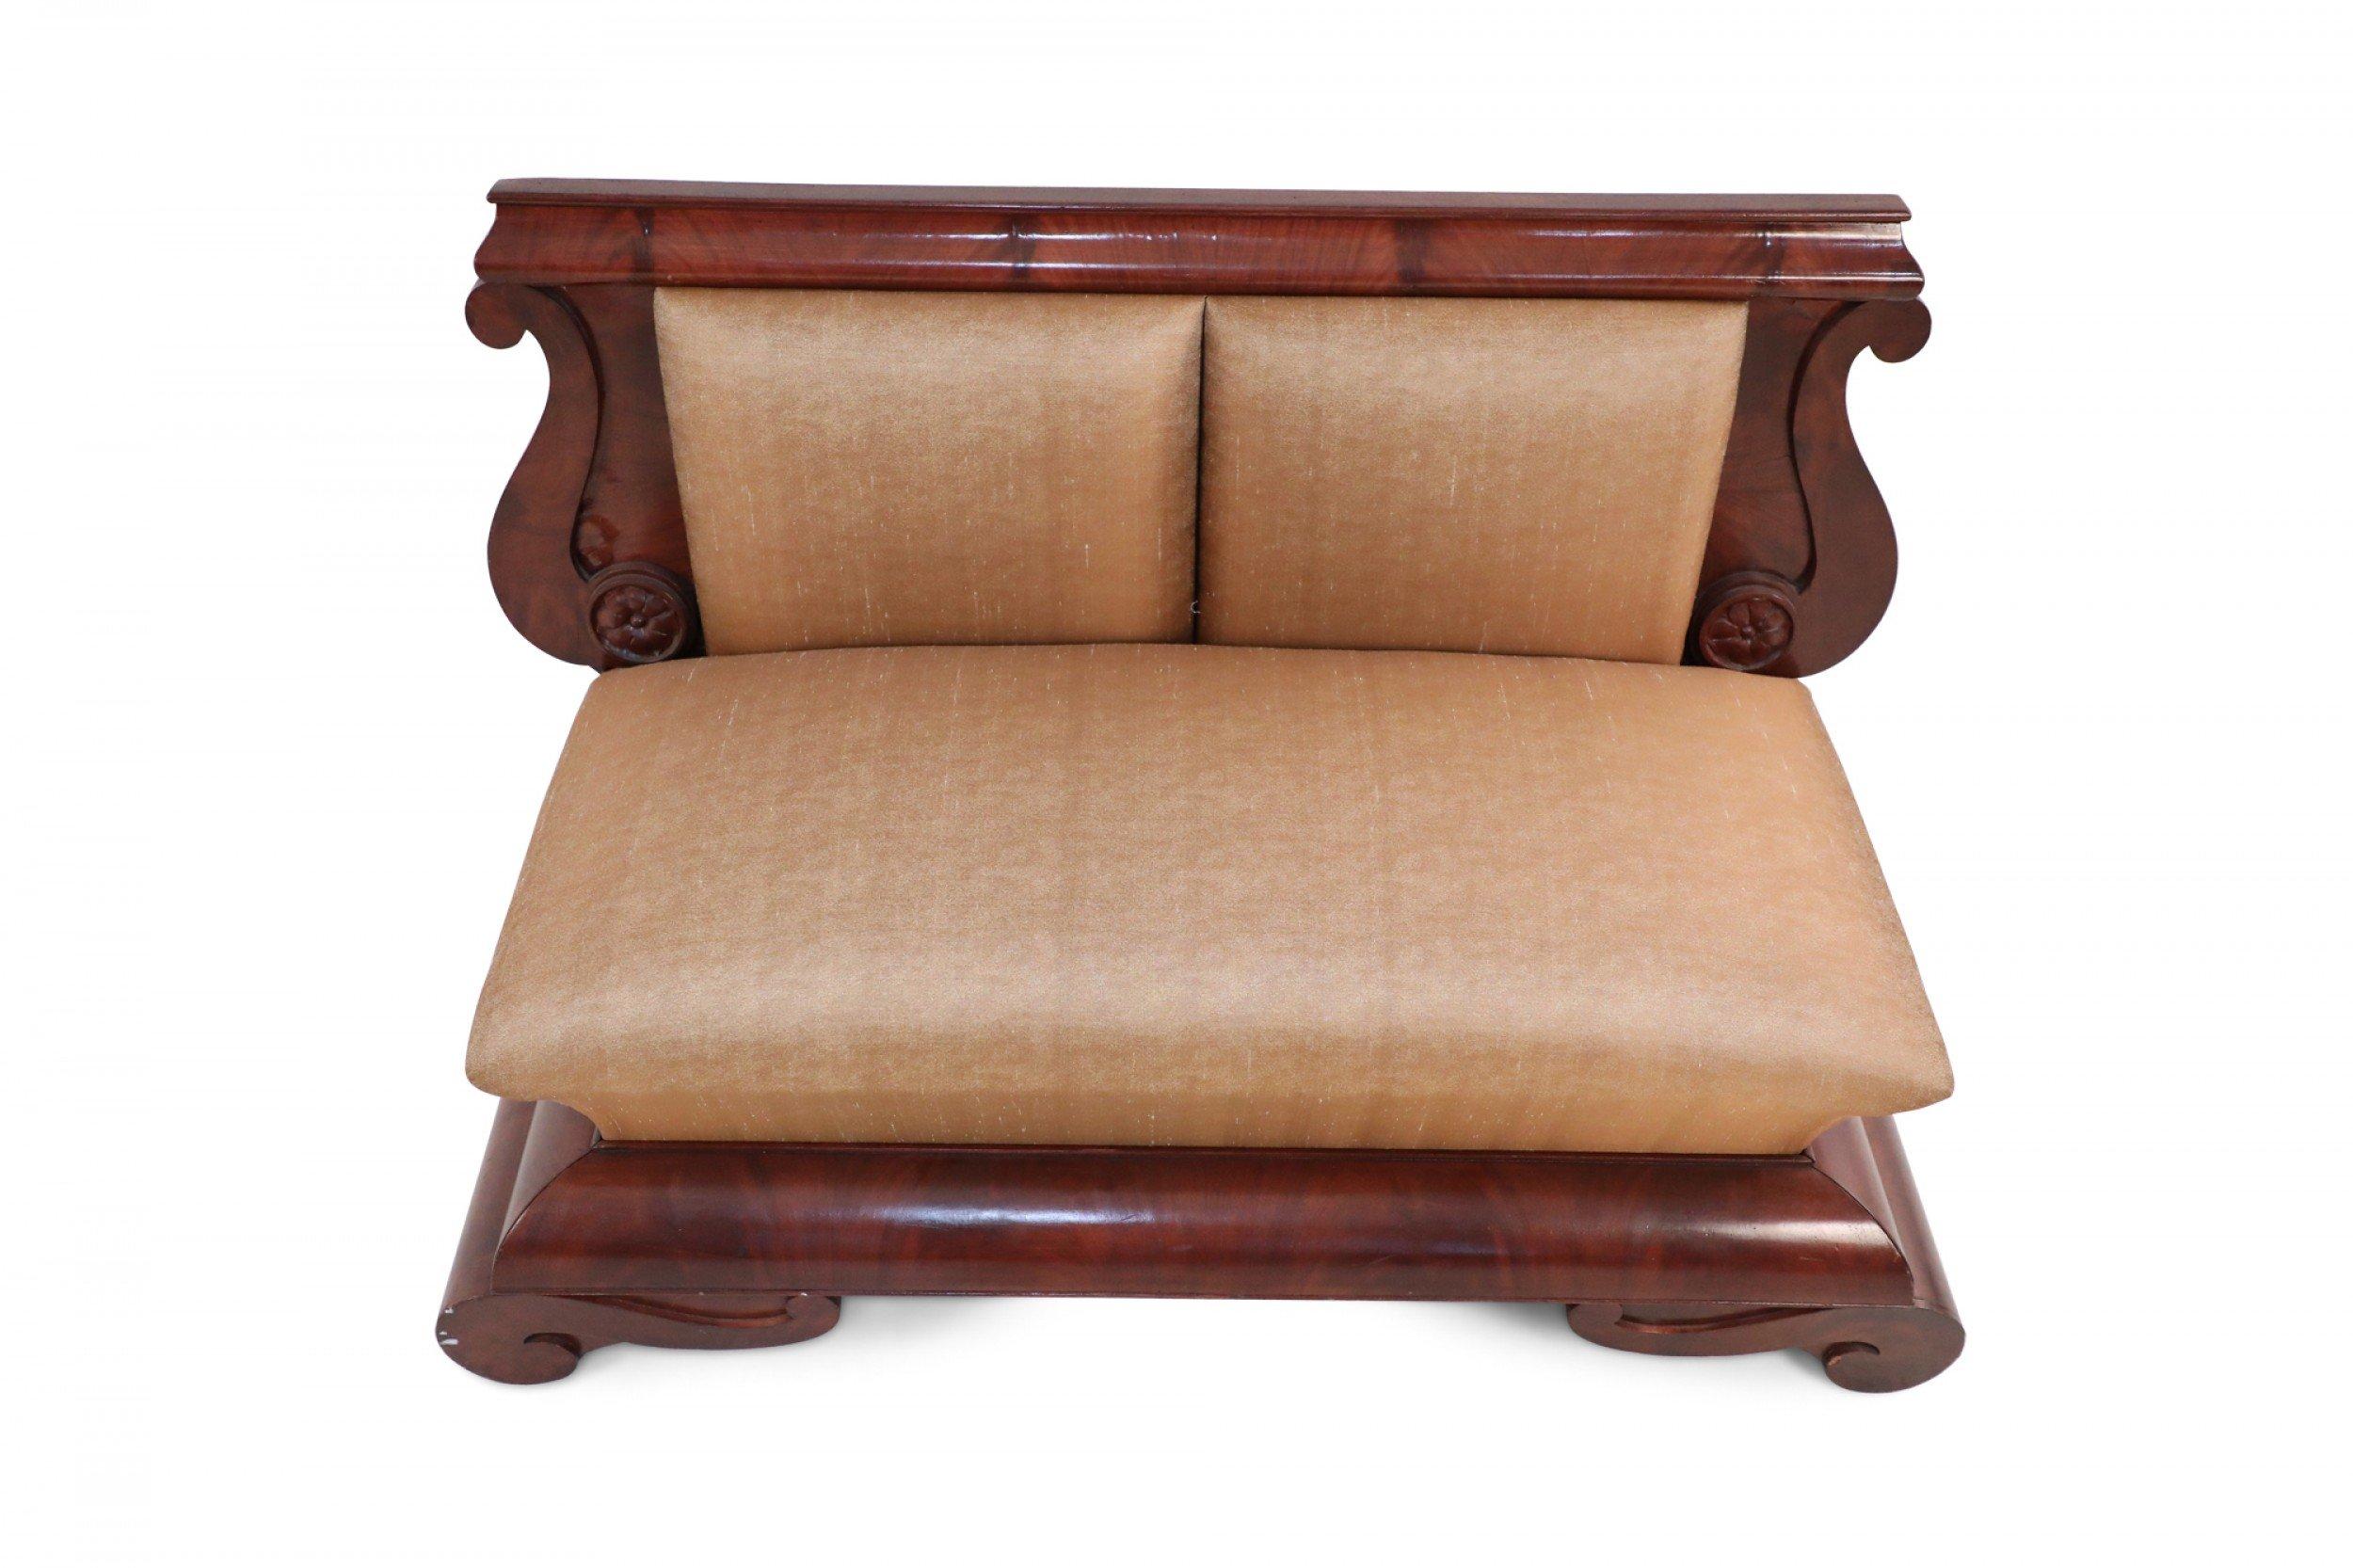 Pair of American Empire Crotch Mahogany Veneer Upholstered Window Seats In Good Condition For Sale In New York, NY